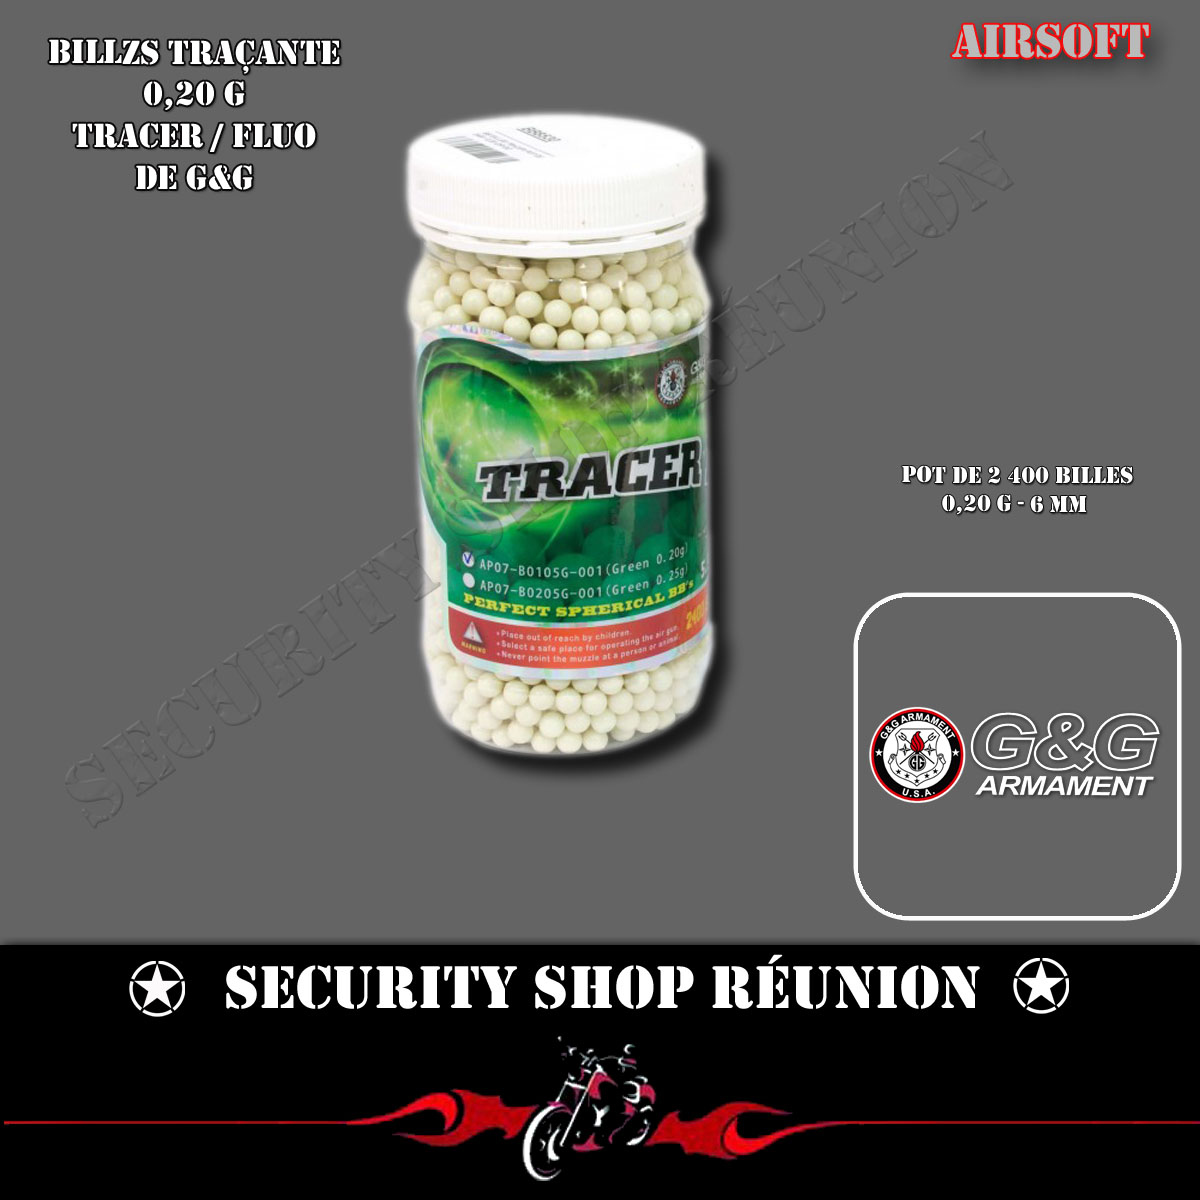 Tokyo Soldier Billes Airsoft Basic Selection 6mm BB 0,20g (BB´s